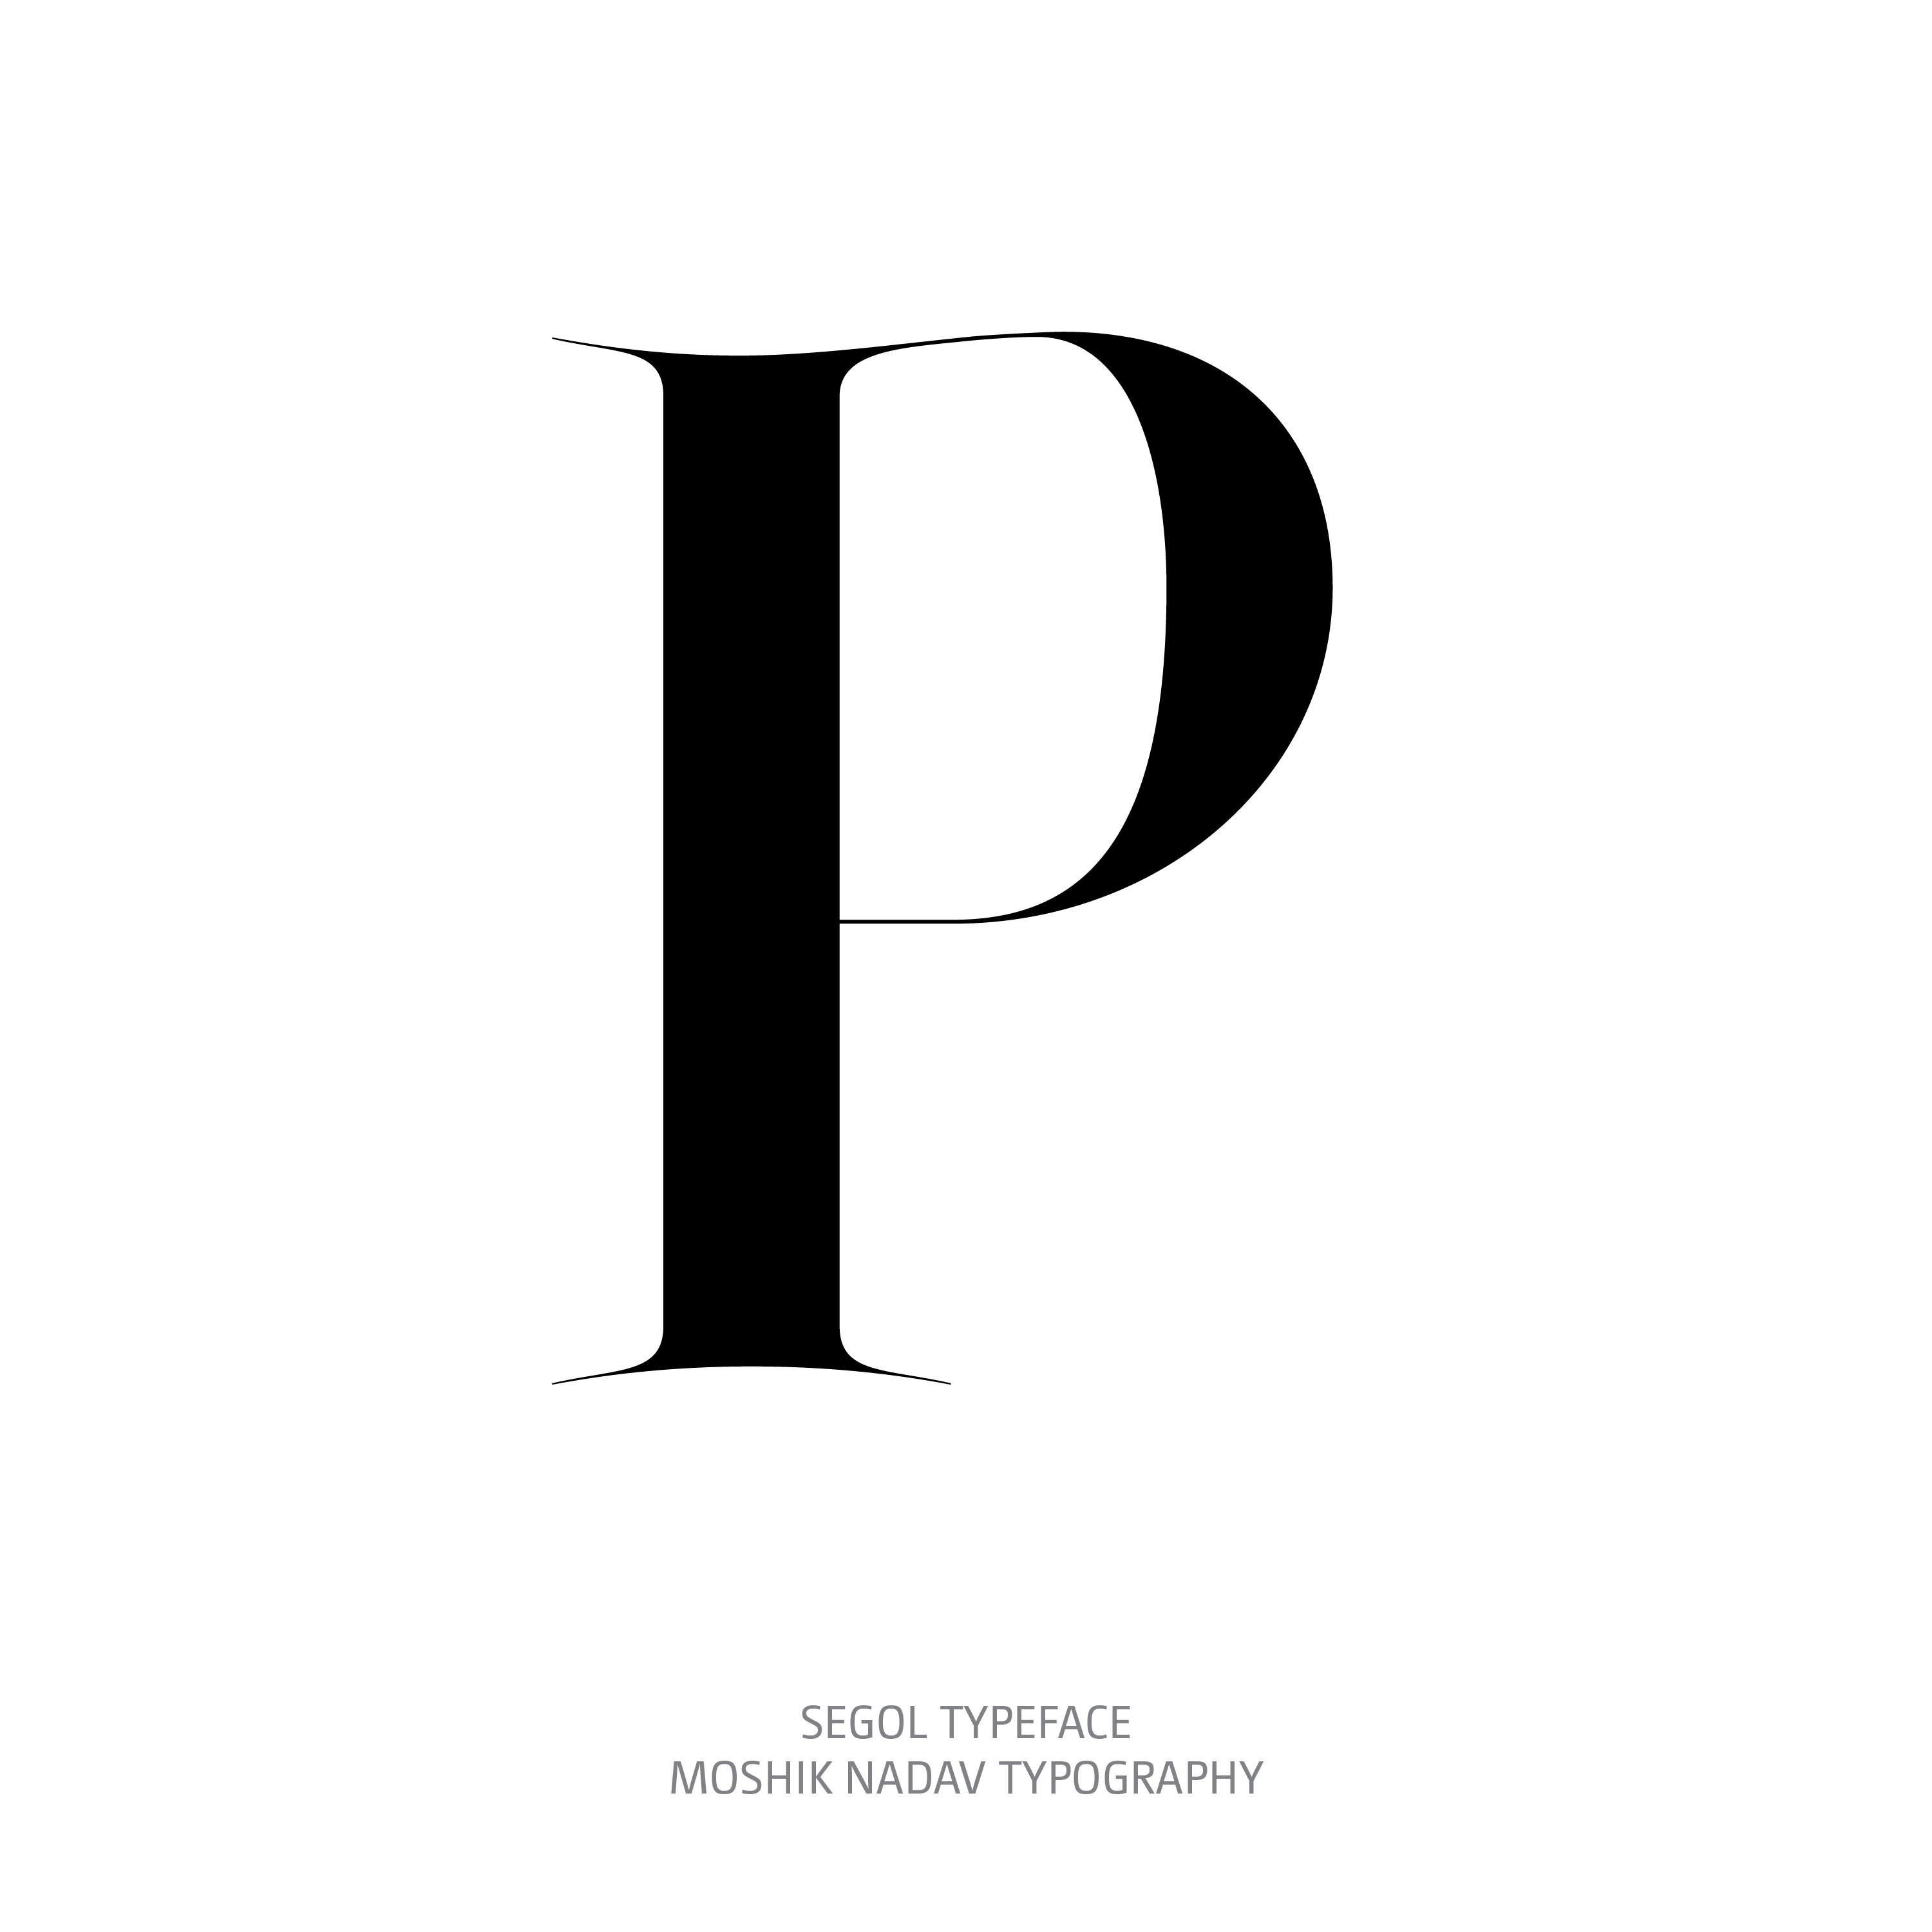 Segol Typeface P The Ultimate Font For Fashion Typography and sexy logos